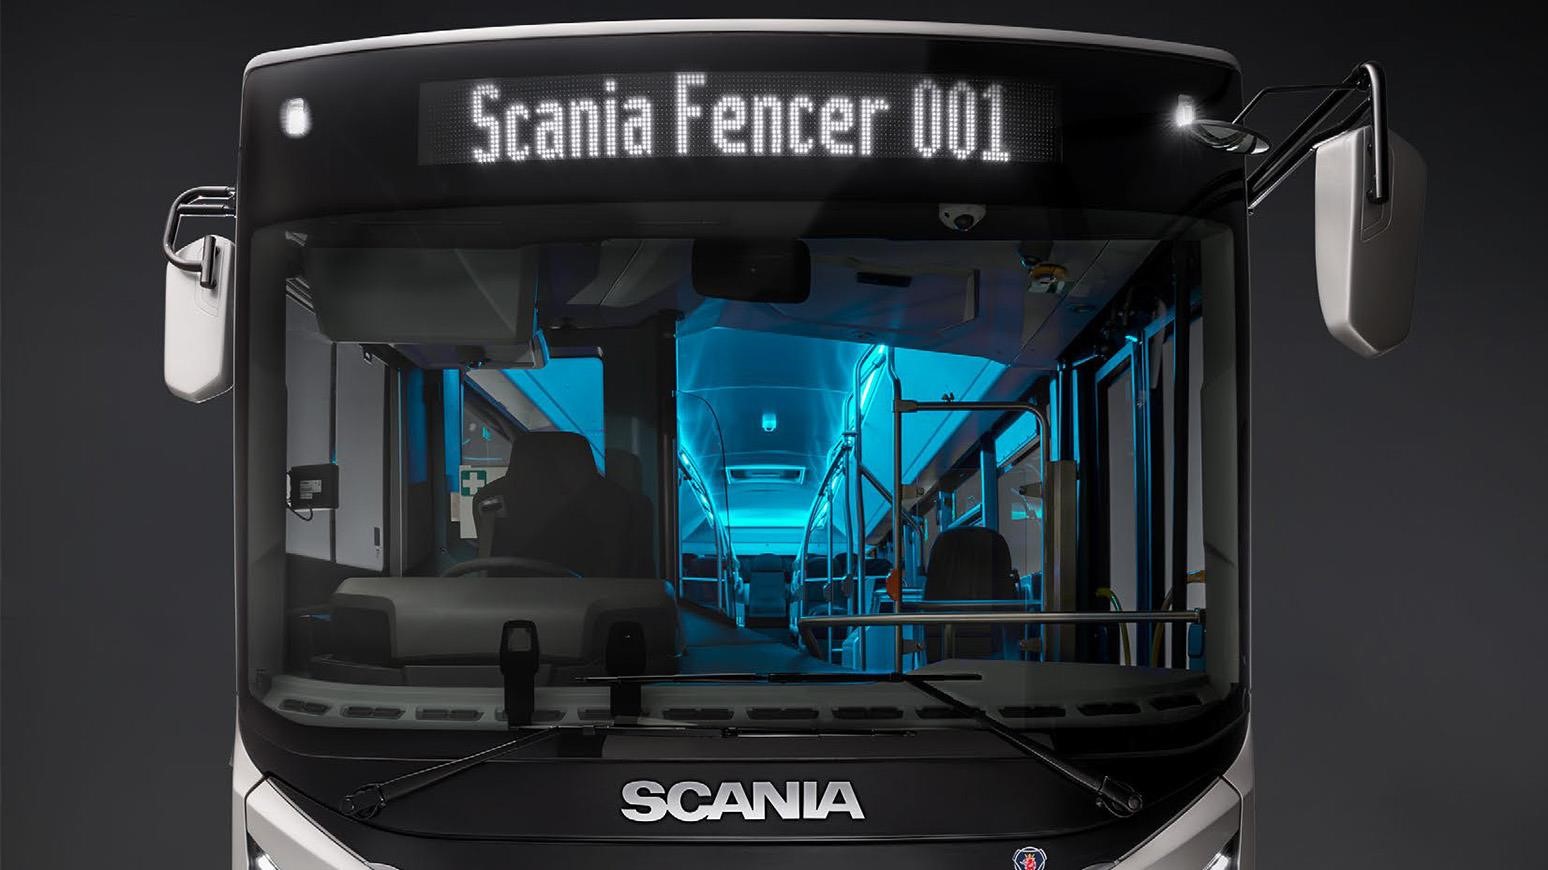 Scania’s Fencer F1 Heralds All-New Range Of Buses Designed For Sustainability